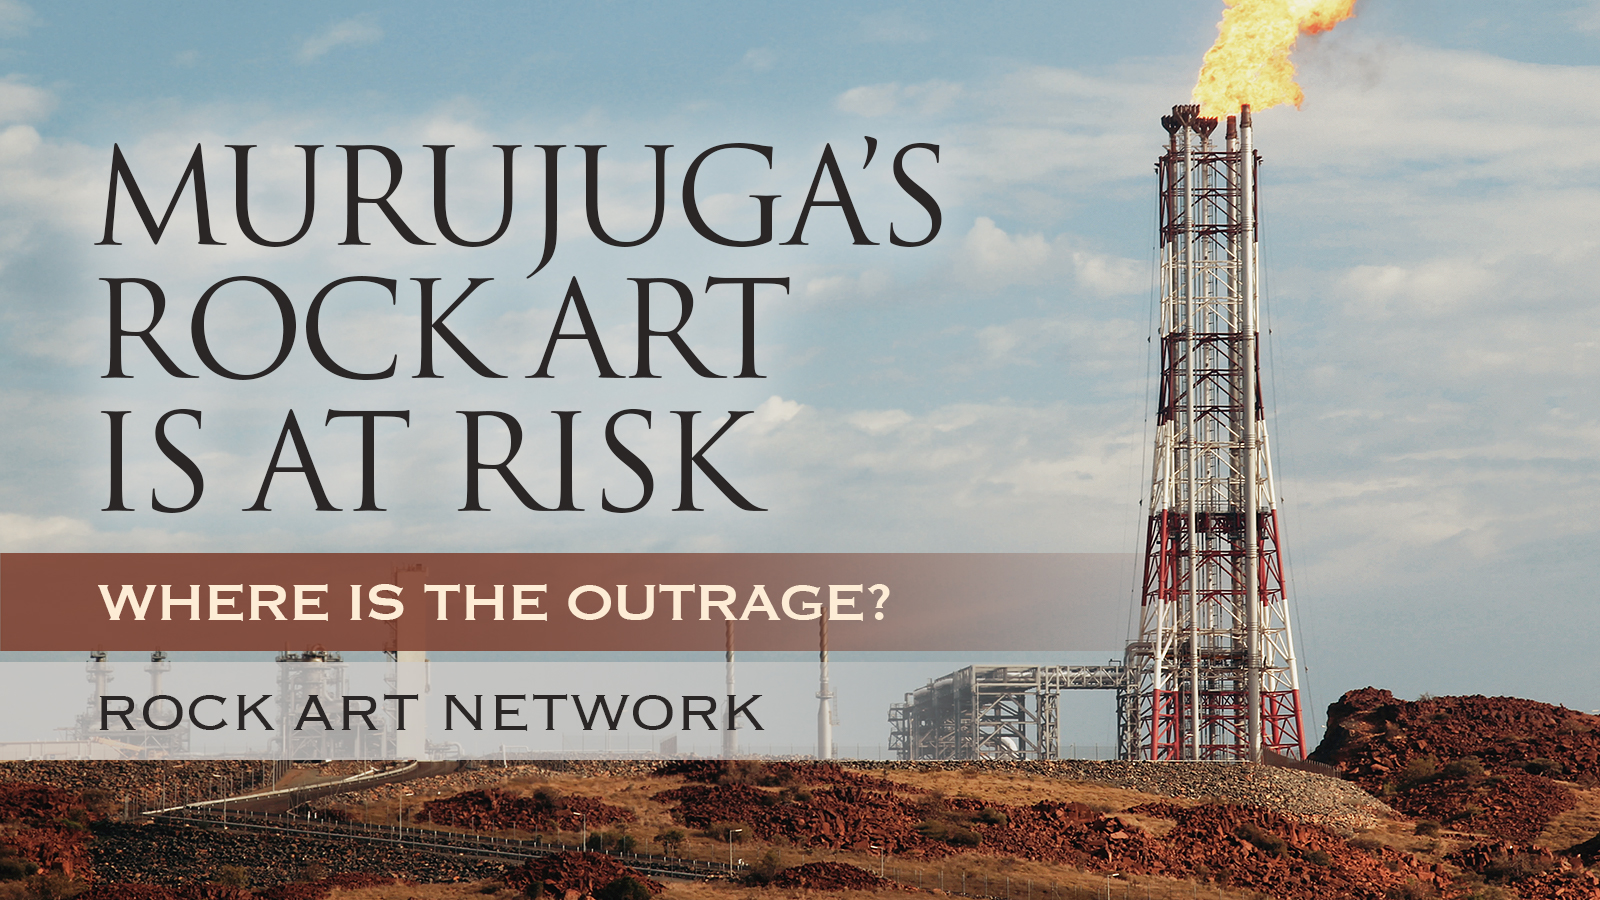 Murujuga's rock art is at risk – where is the outrage?